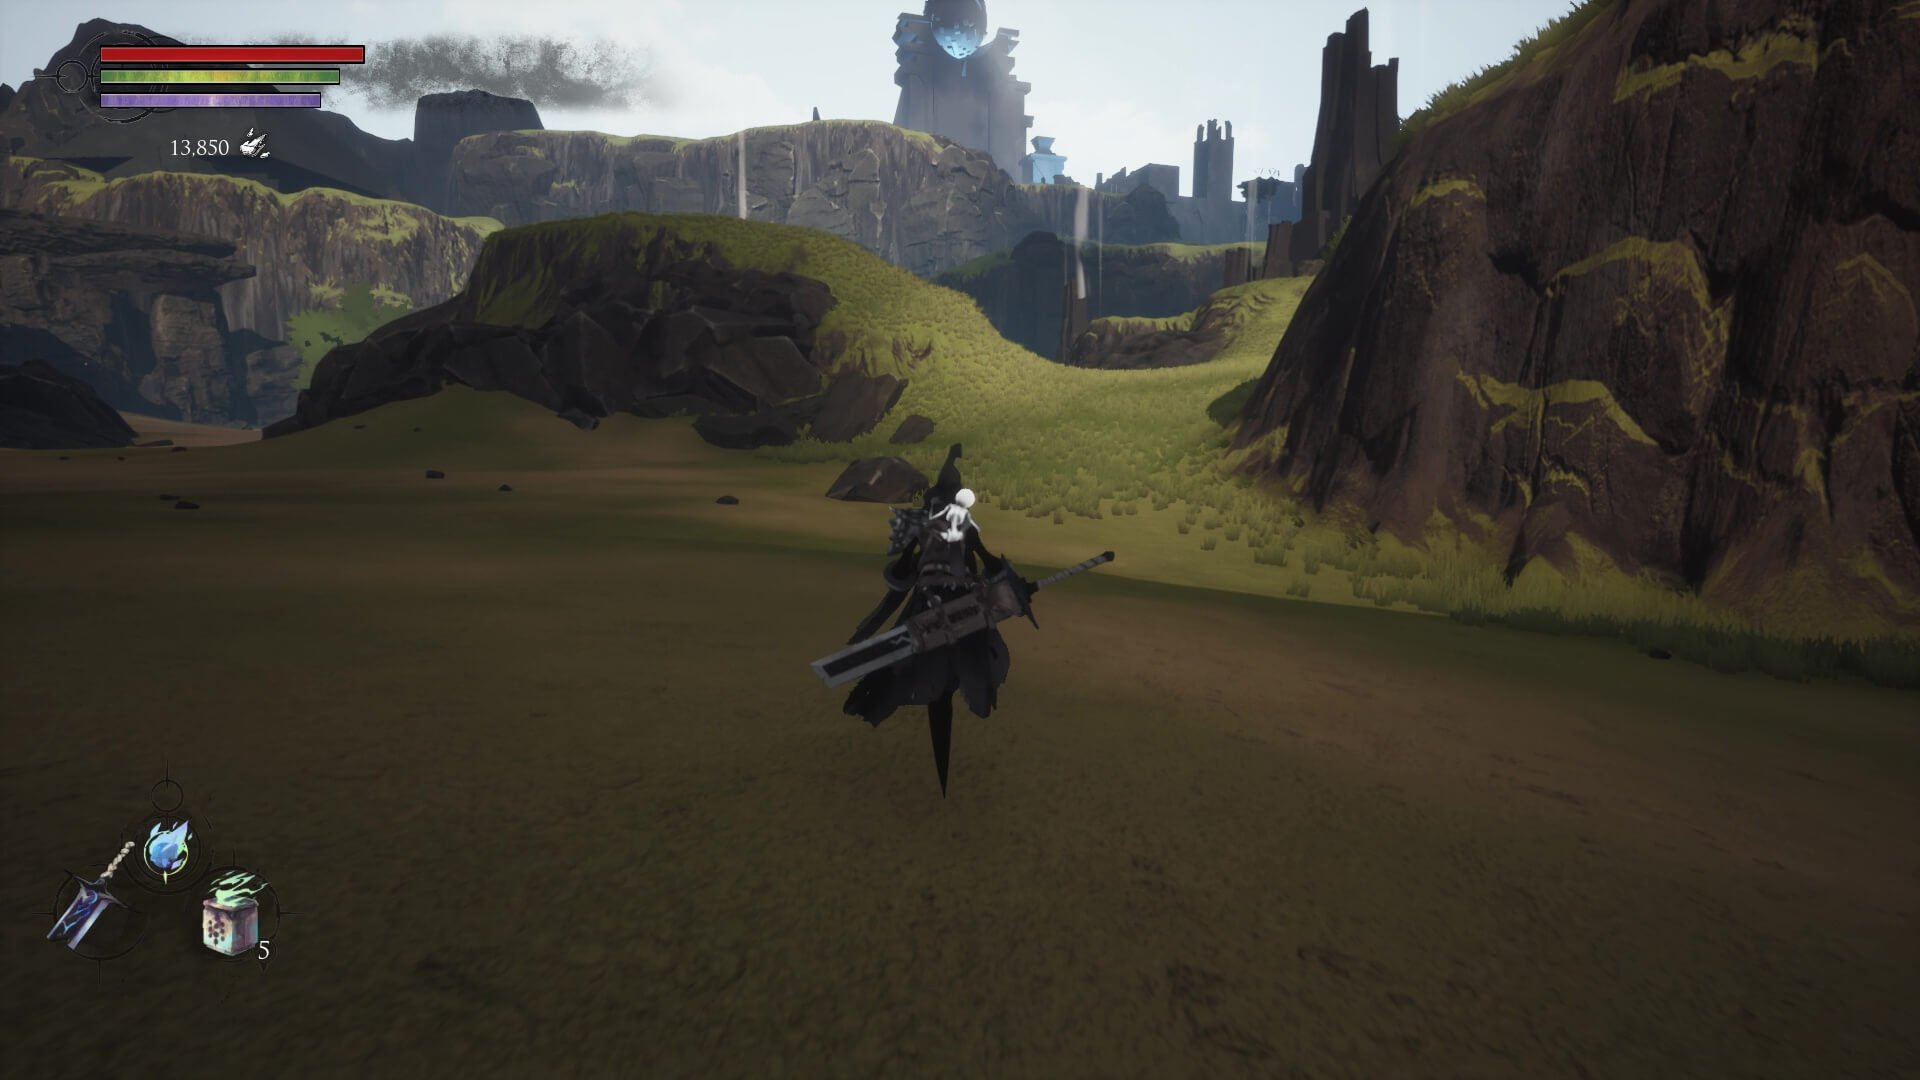 The open world environment in Shattered - Tale of the Forgotten King